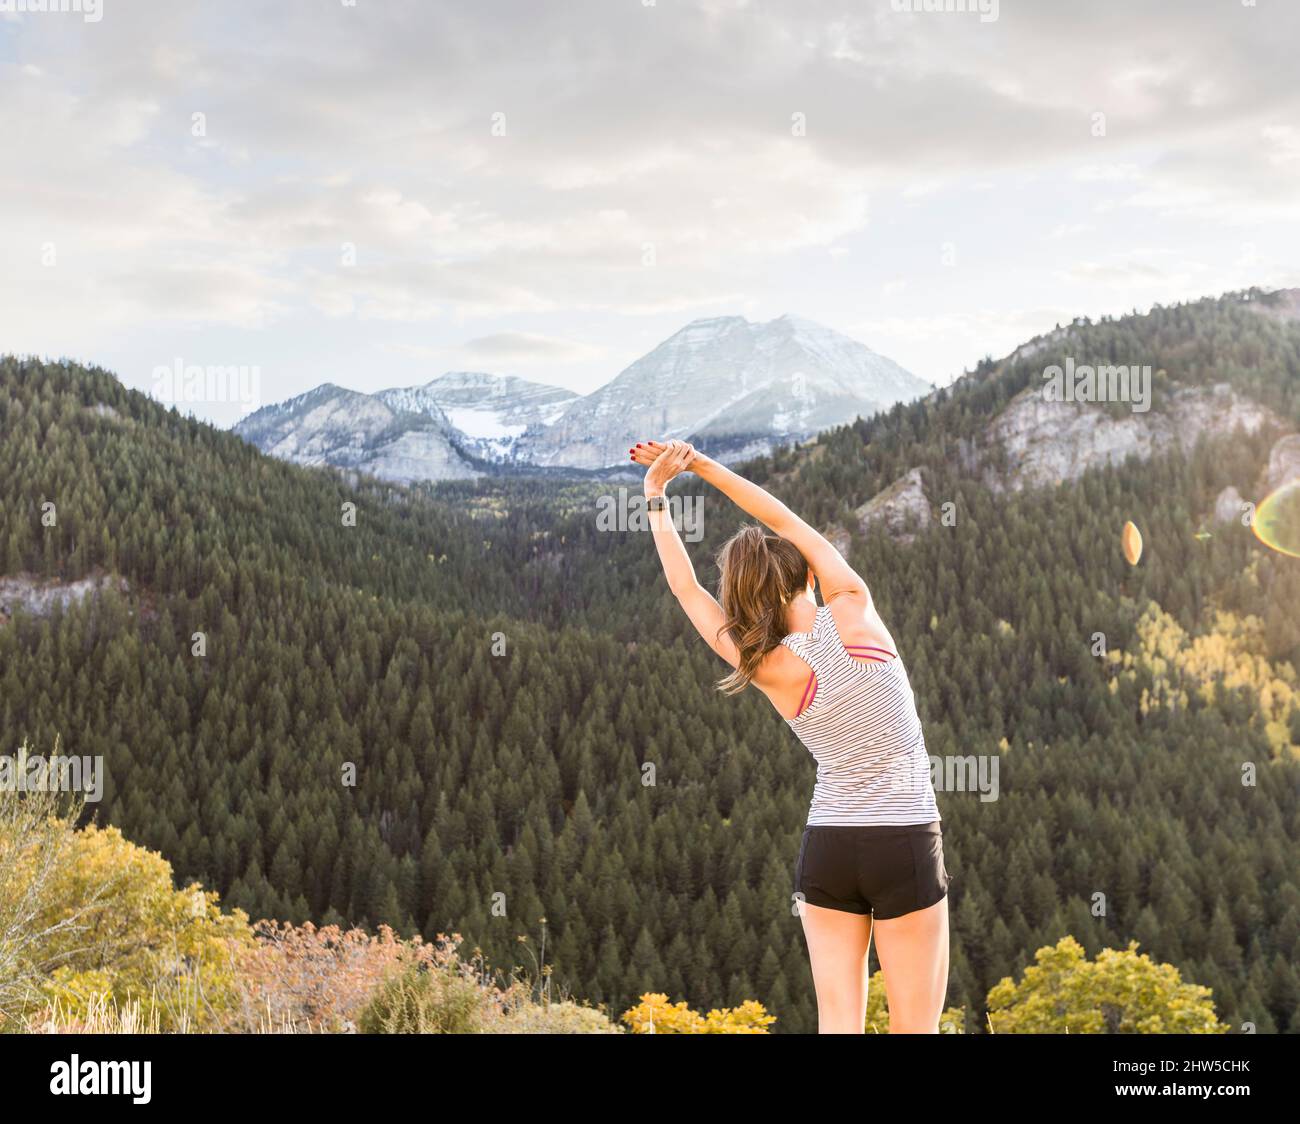 United States, Utah, American Fork, Rear view of woman stretching in mountain landscape Stock Photo